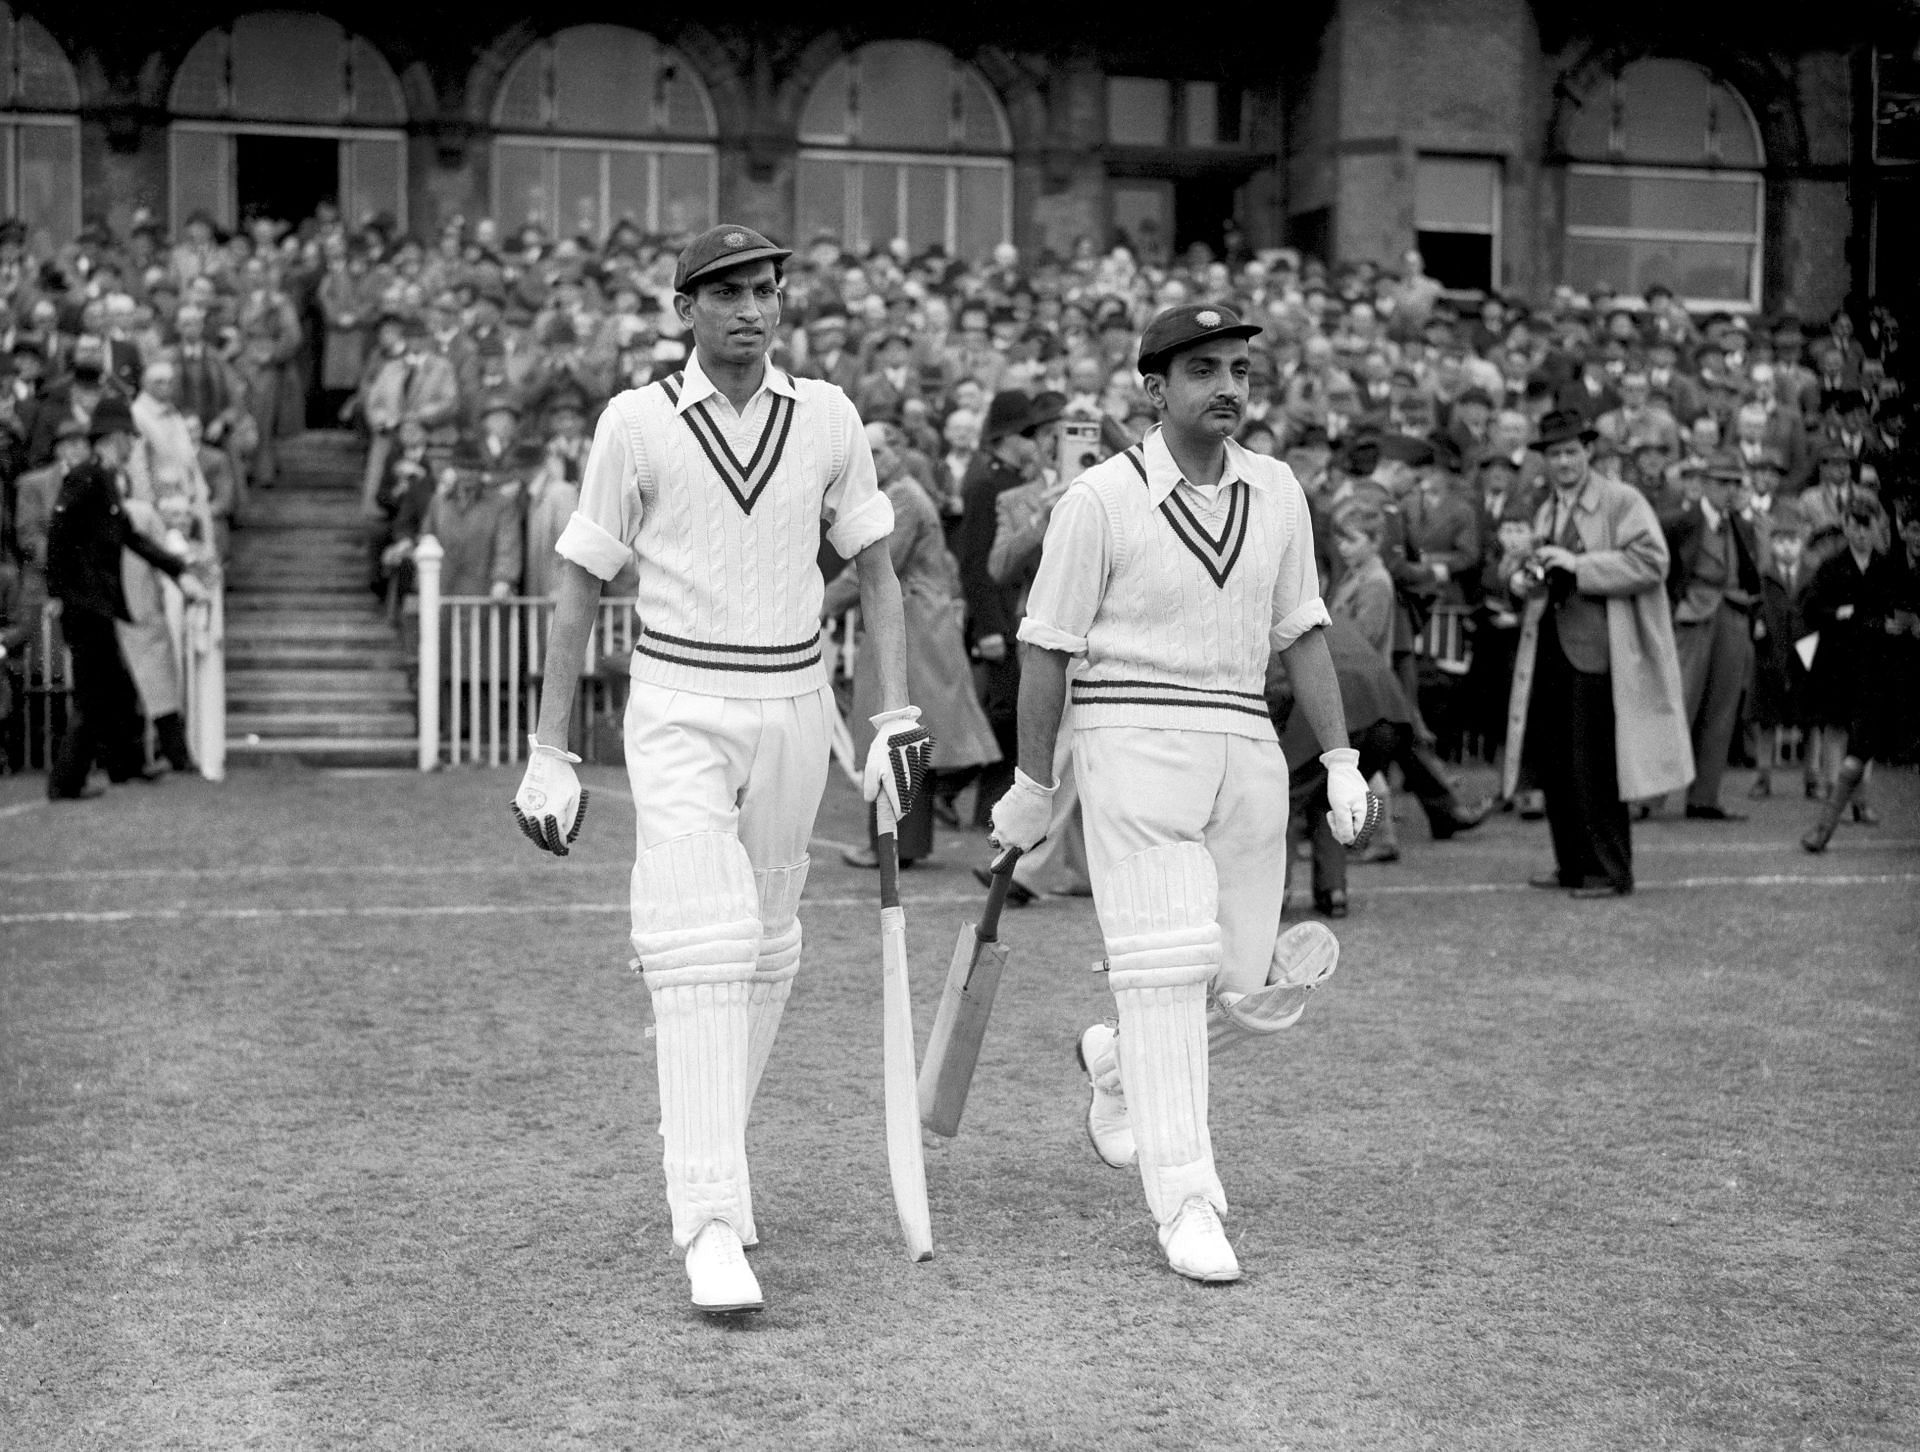 Vijay Merchant (right) walking out to open with Mushtaq Ali. Merchant&rsquo;s all-time first-class career average of 71.64 per innings is second only to Sir Donald Bradman&rsquo;s monumental 95.14.